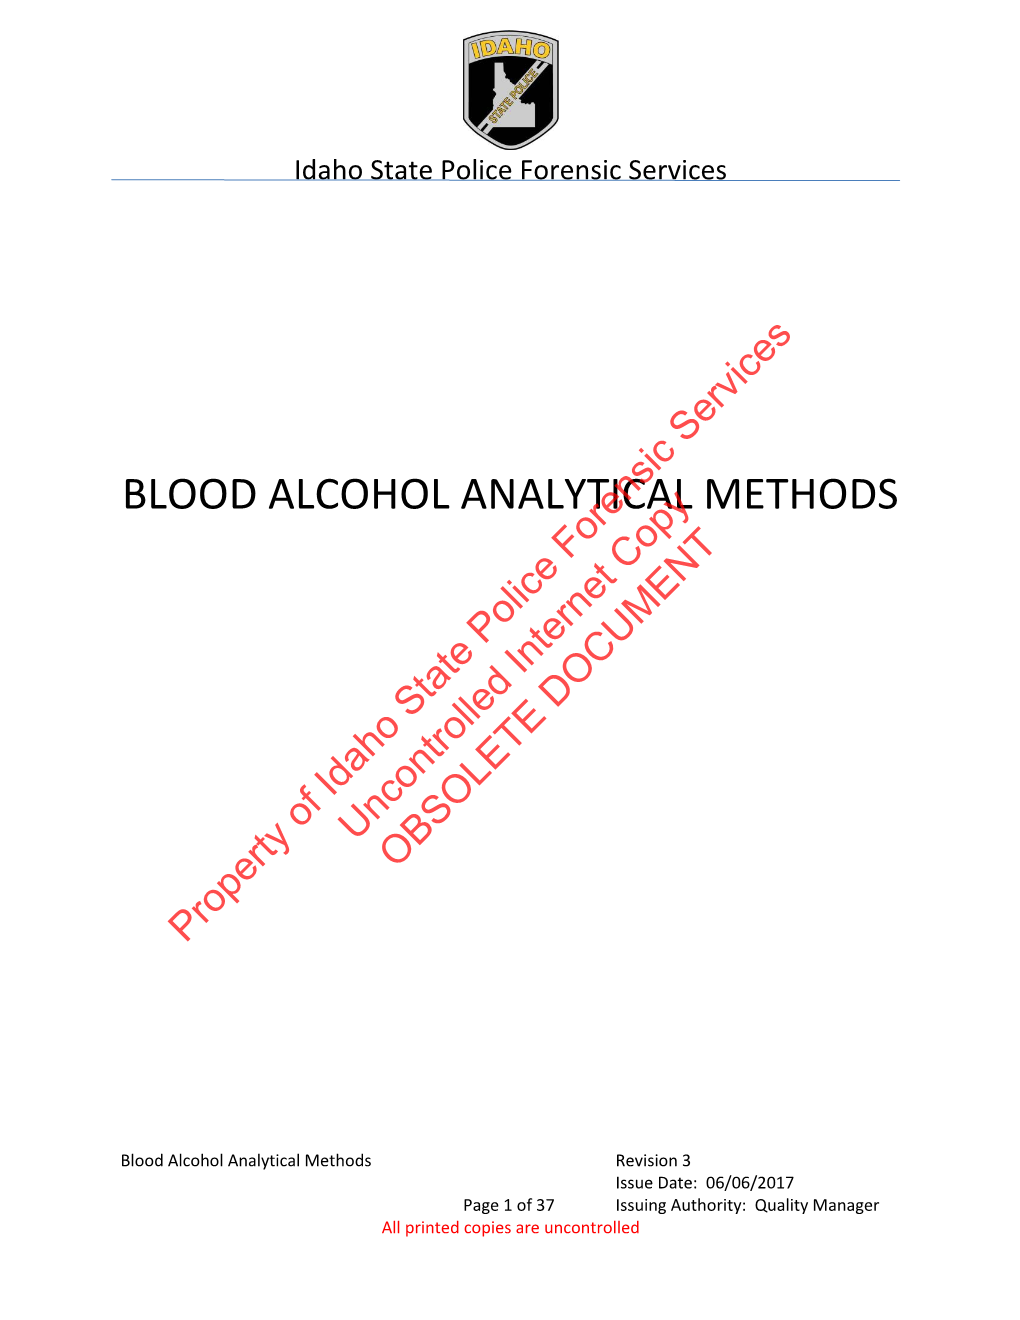 Blood Alcohol Analytical Methods